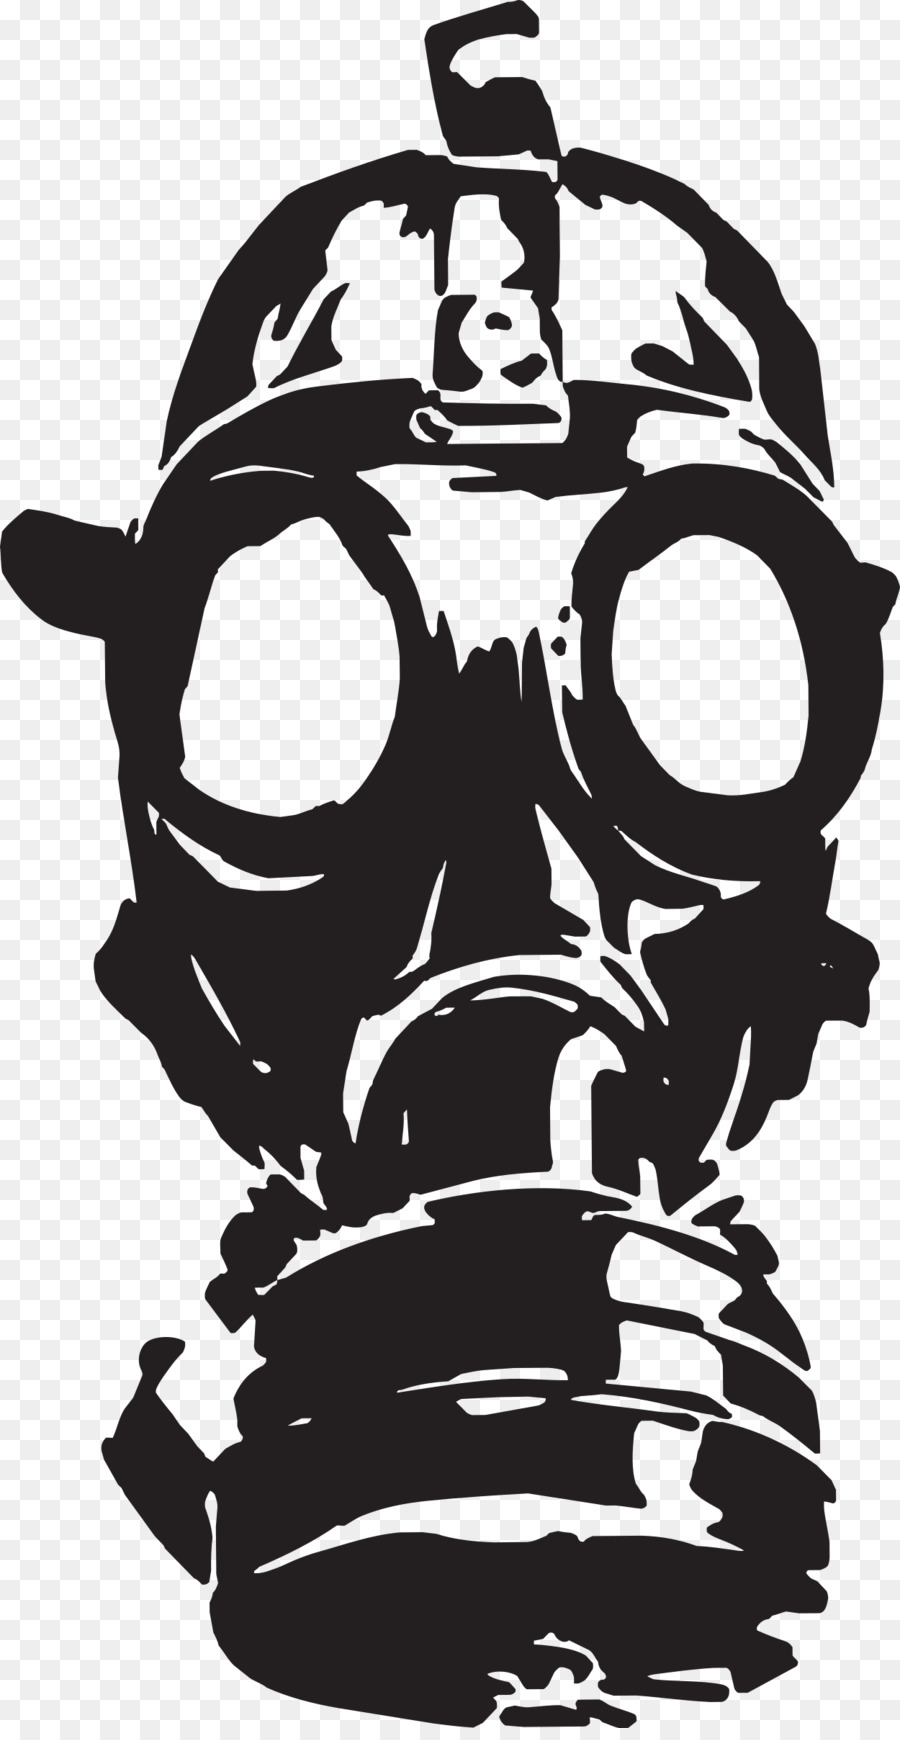 Wall decal Bumper sticker Gas mask - gas mask png download - 1250*2400 - Free Transparent Decal png Download.